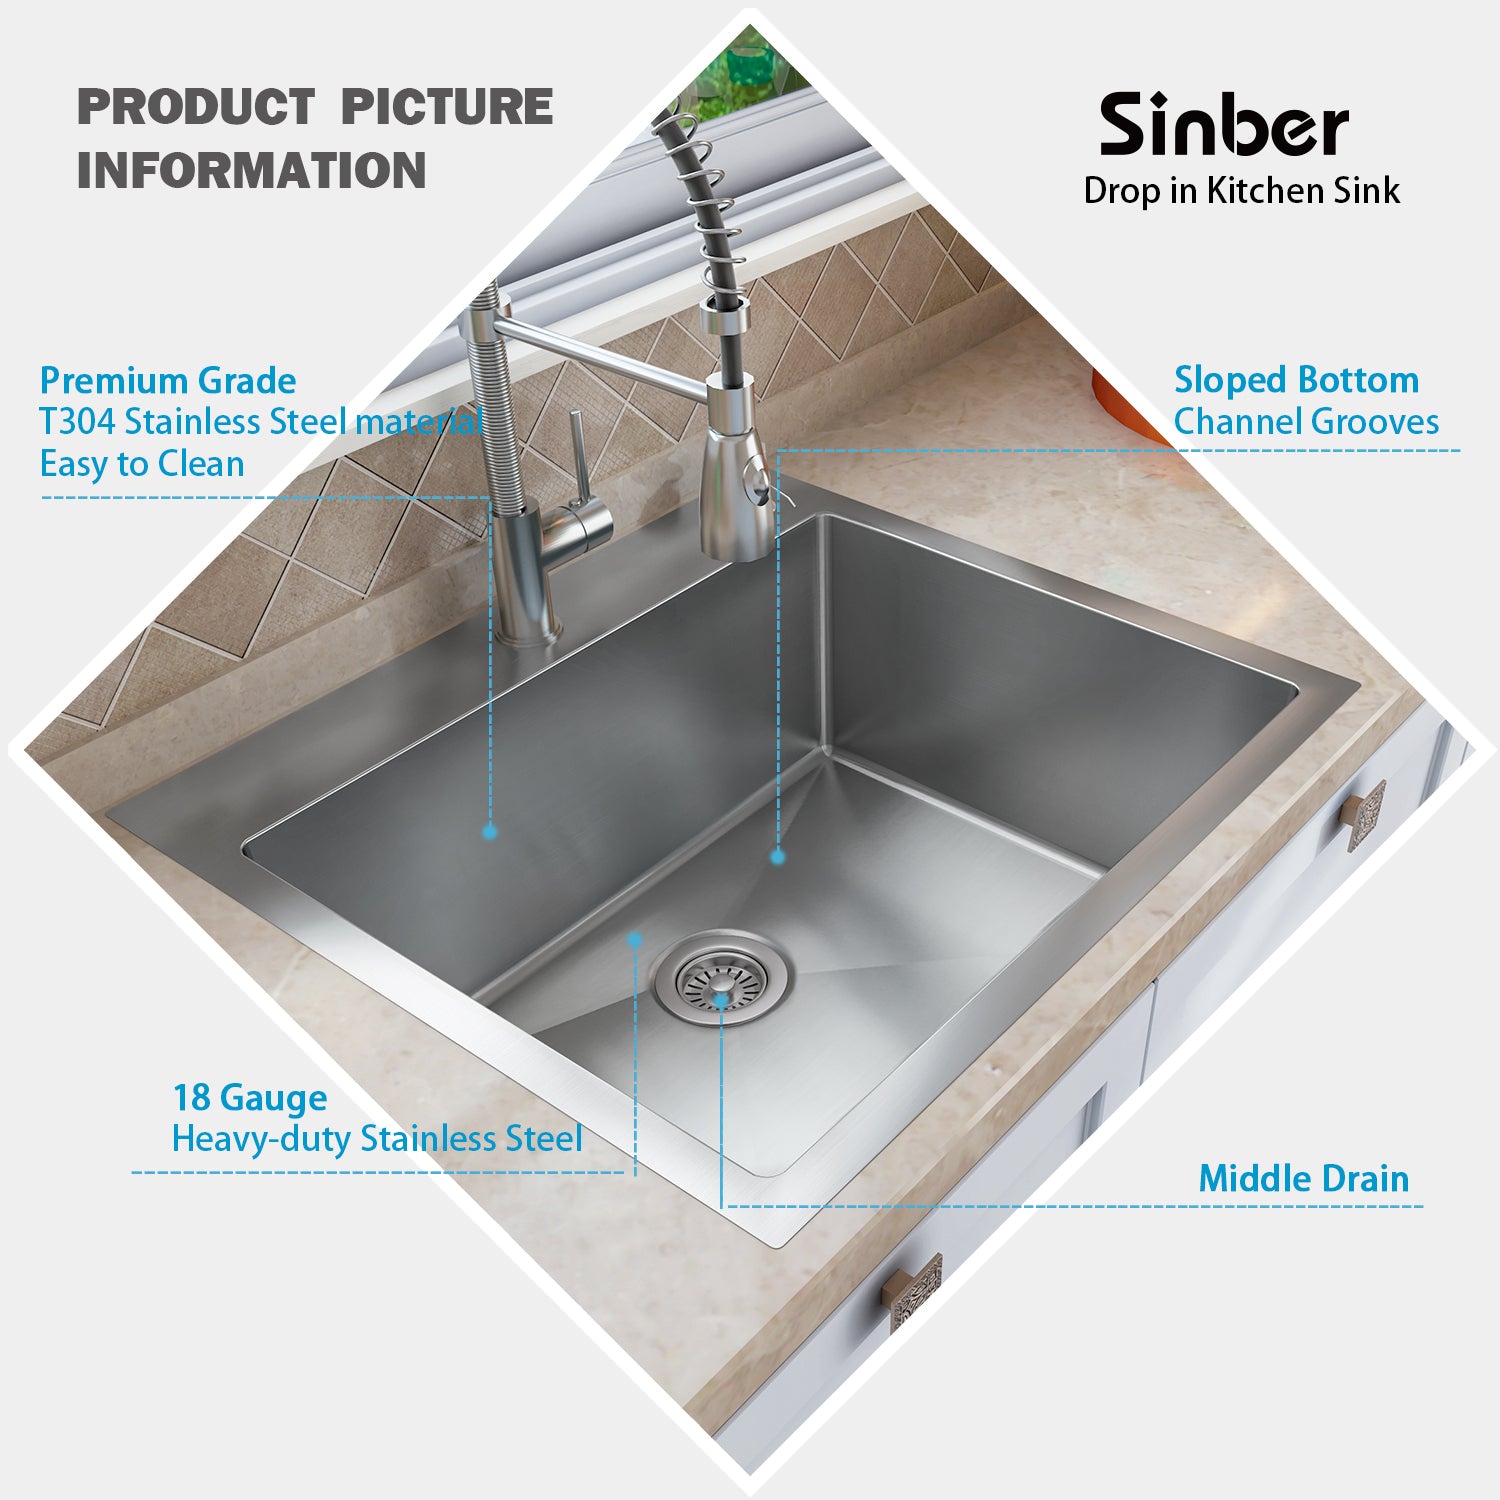 Sinber 25" x 22" x 12" Drop In Single Bowl Kitchen Sink with 18 Gauge 304 Stainless Steel Satin Finish HT2522S-S-12 (Sink Only)